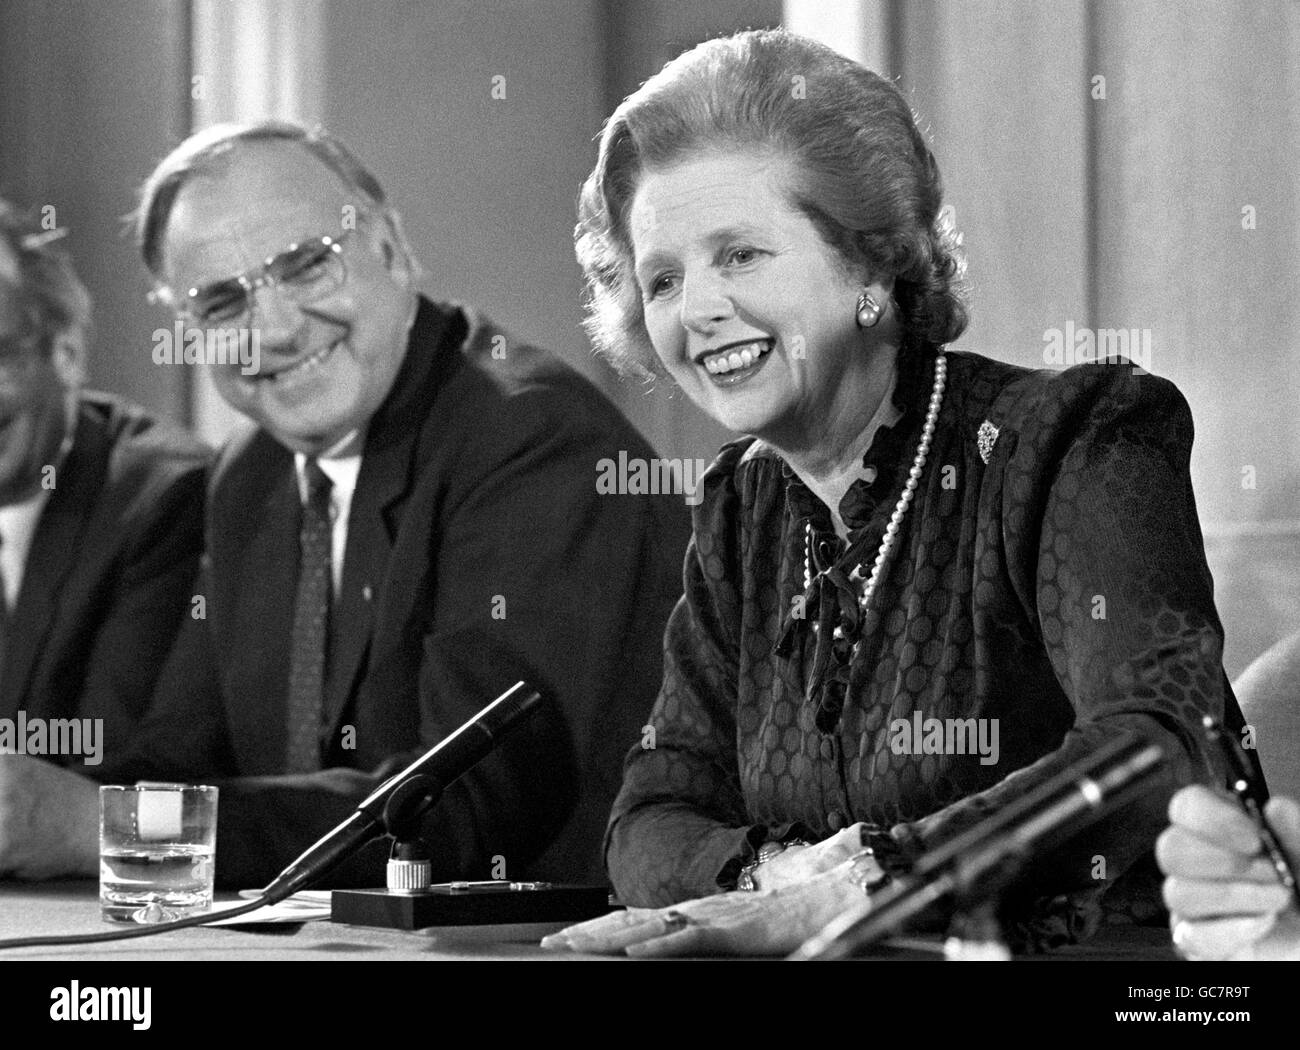 Mrs Thatcher and Dr Kohl Face the Press - London - 1983 Stock Photo